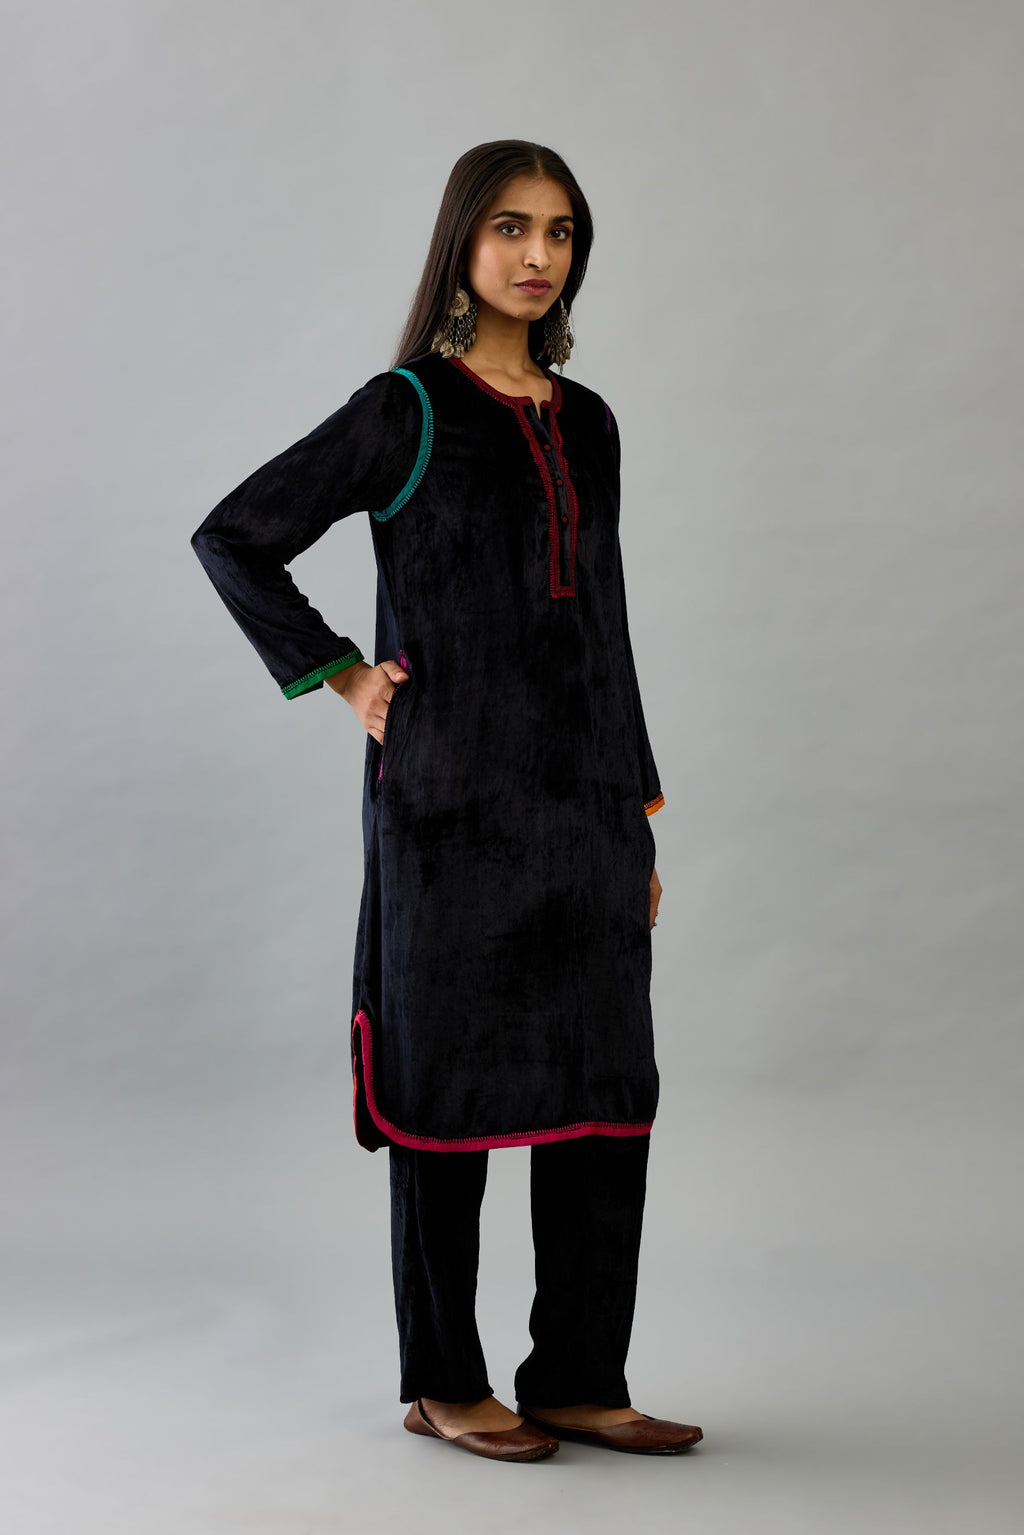 Black silk velvet short kurta set with round hem and multi colored silk facing, highlighted with embroidery.